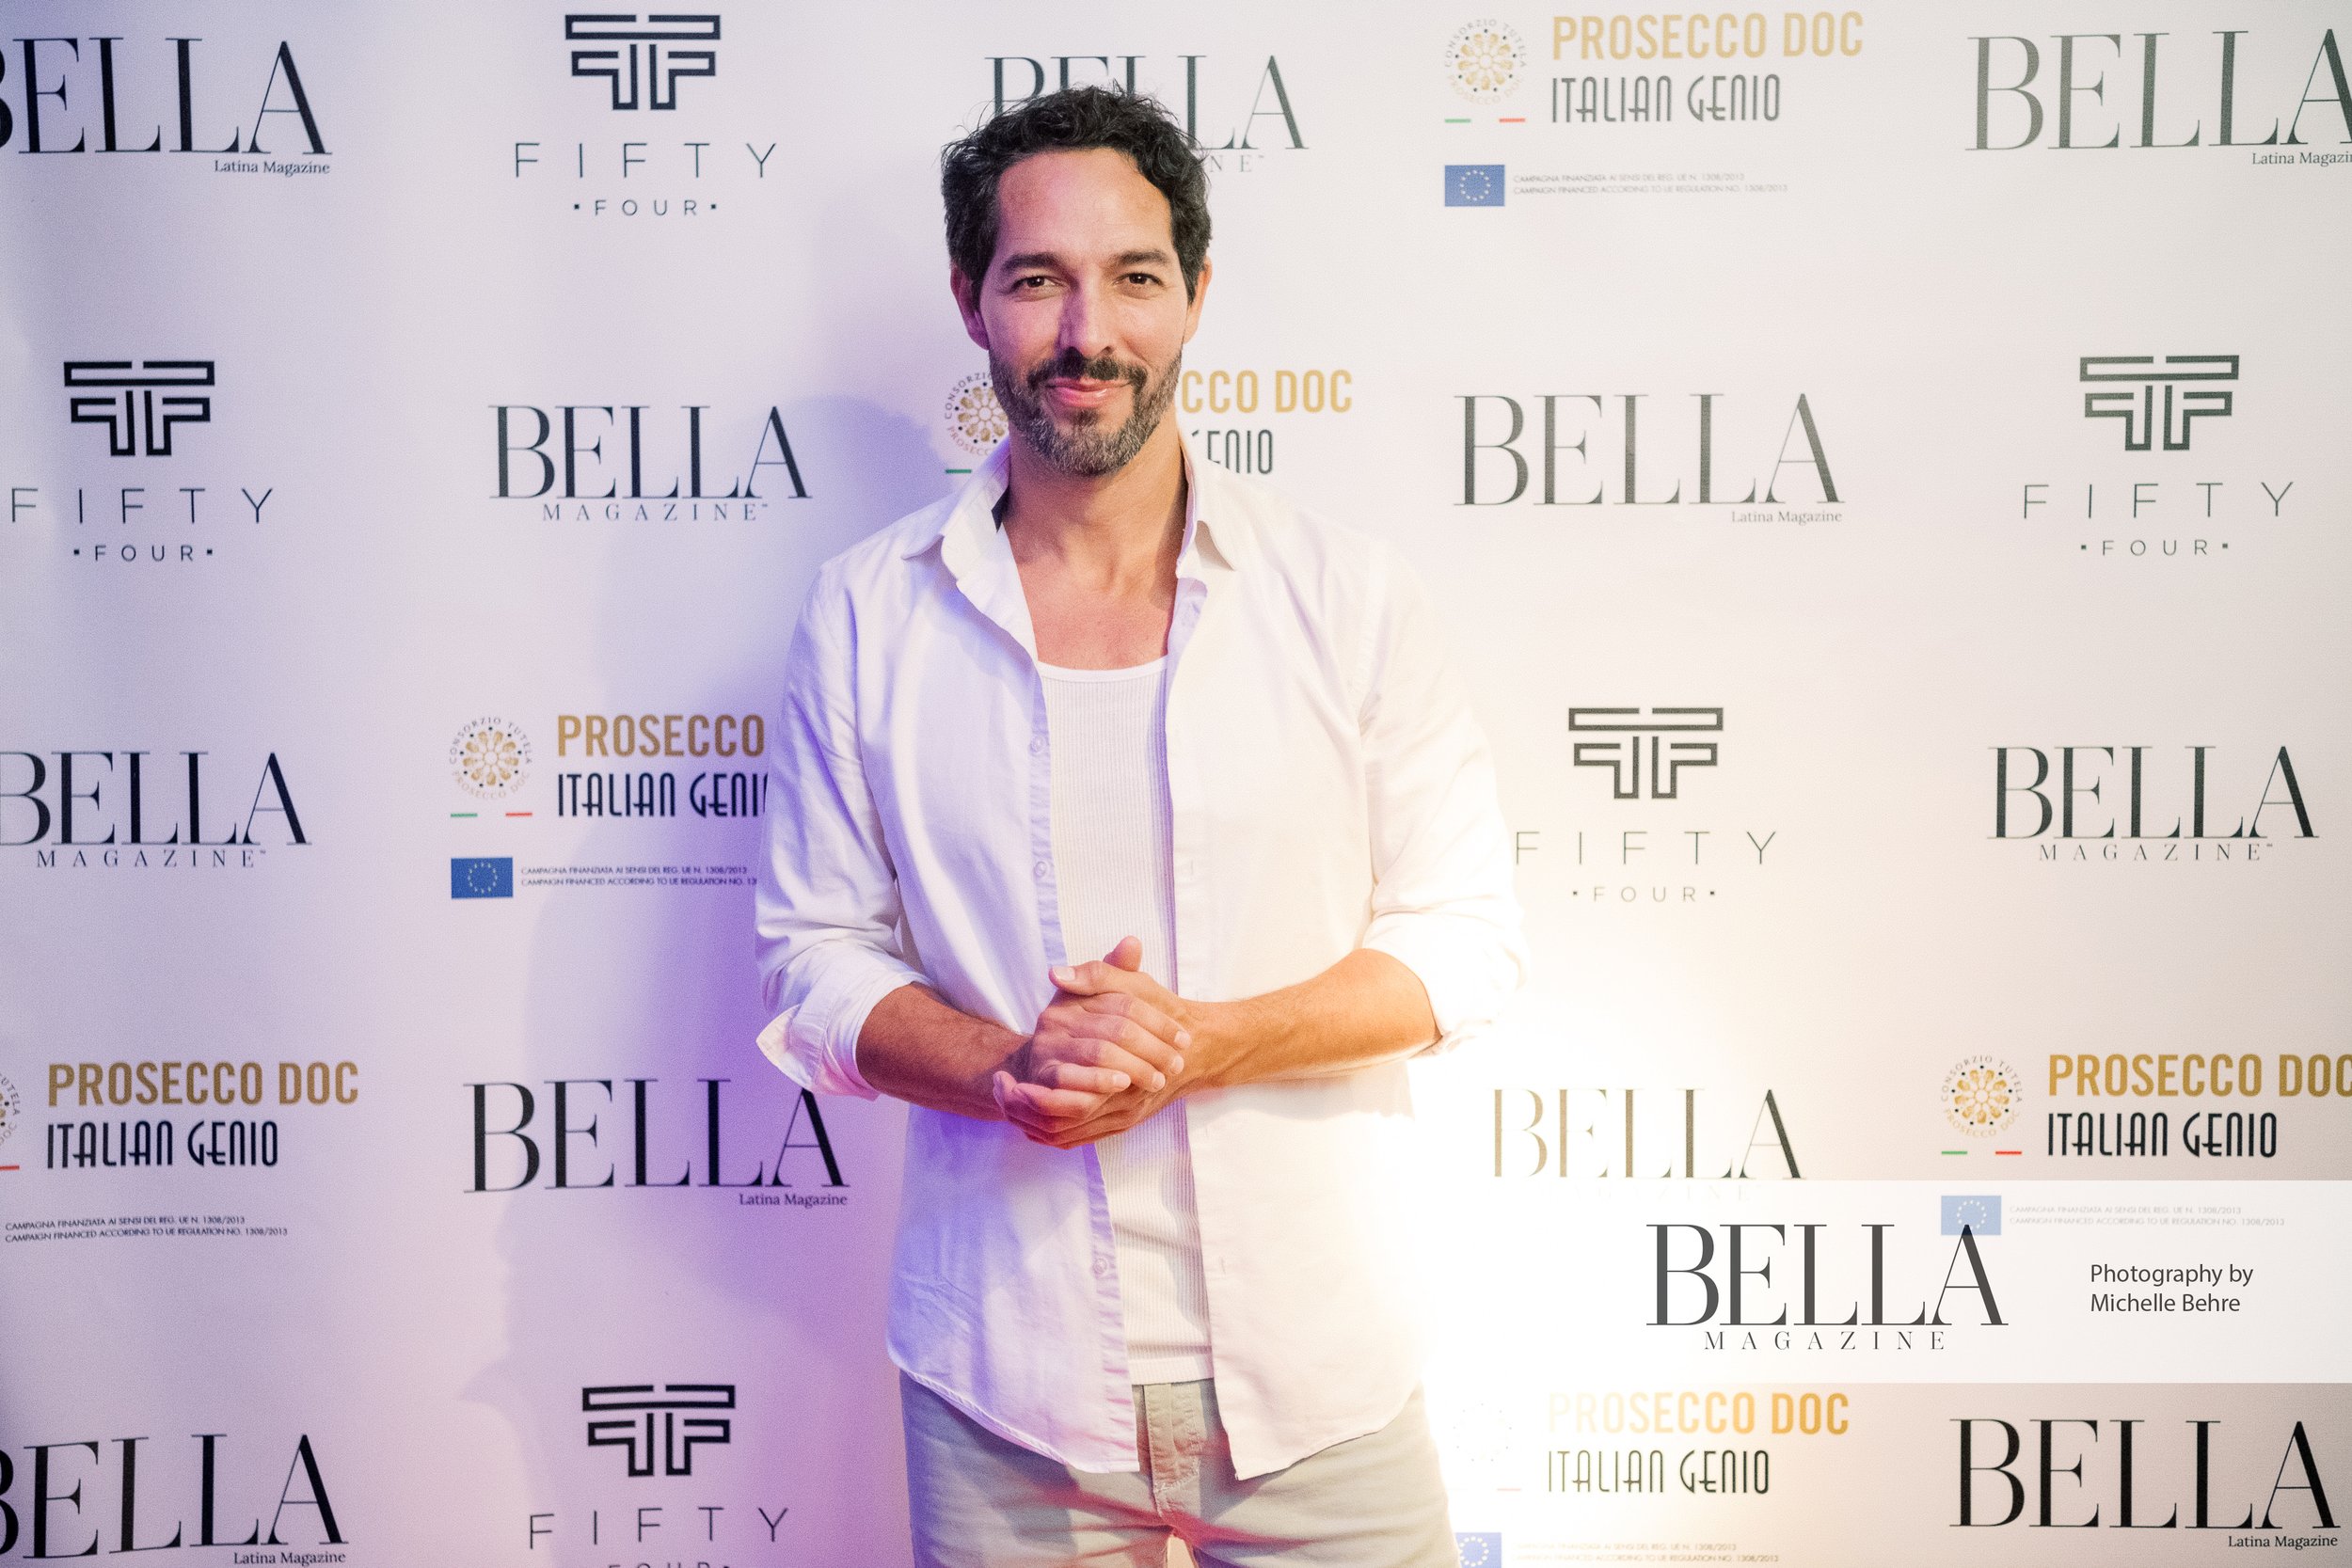 BELLA-Magazine-September-Issue-Cover-Event-Fifty-Four-163 2.jpg